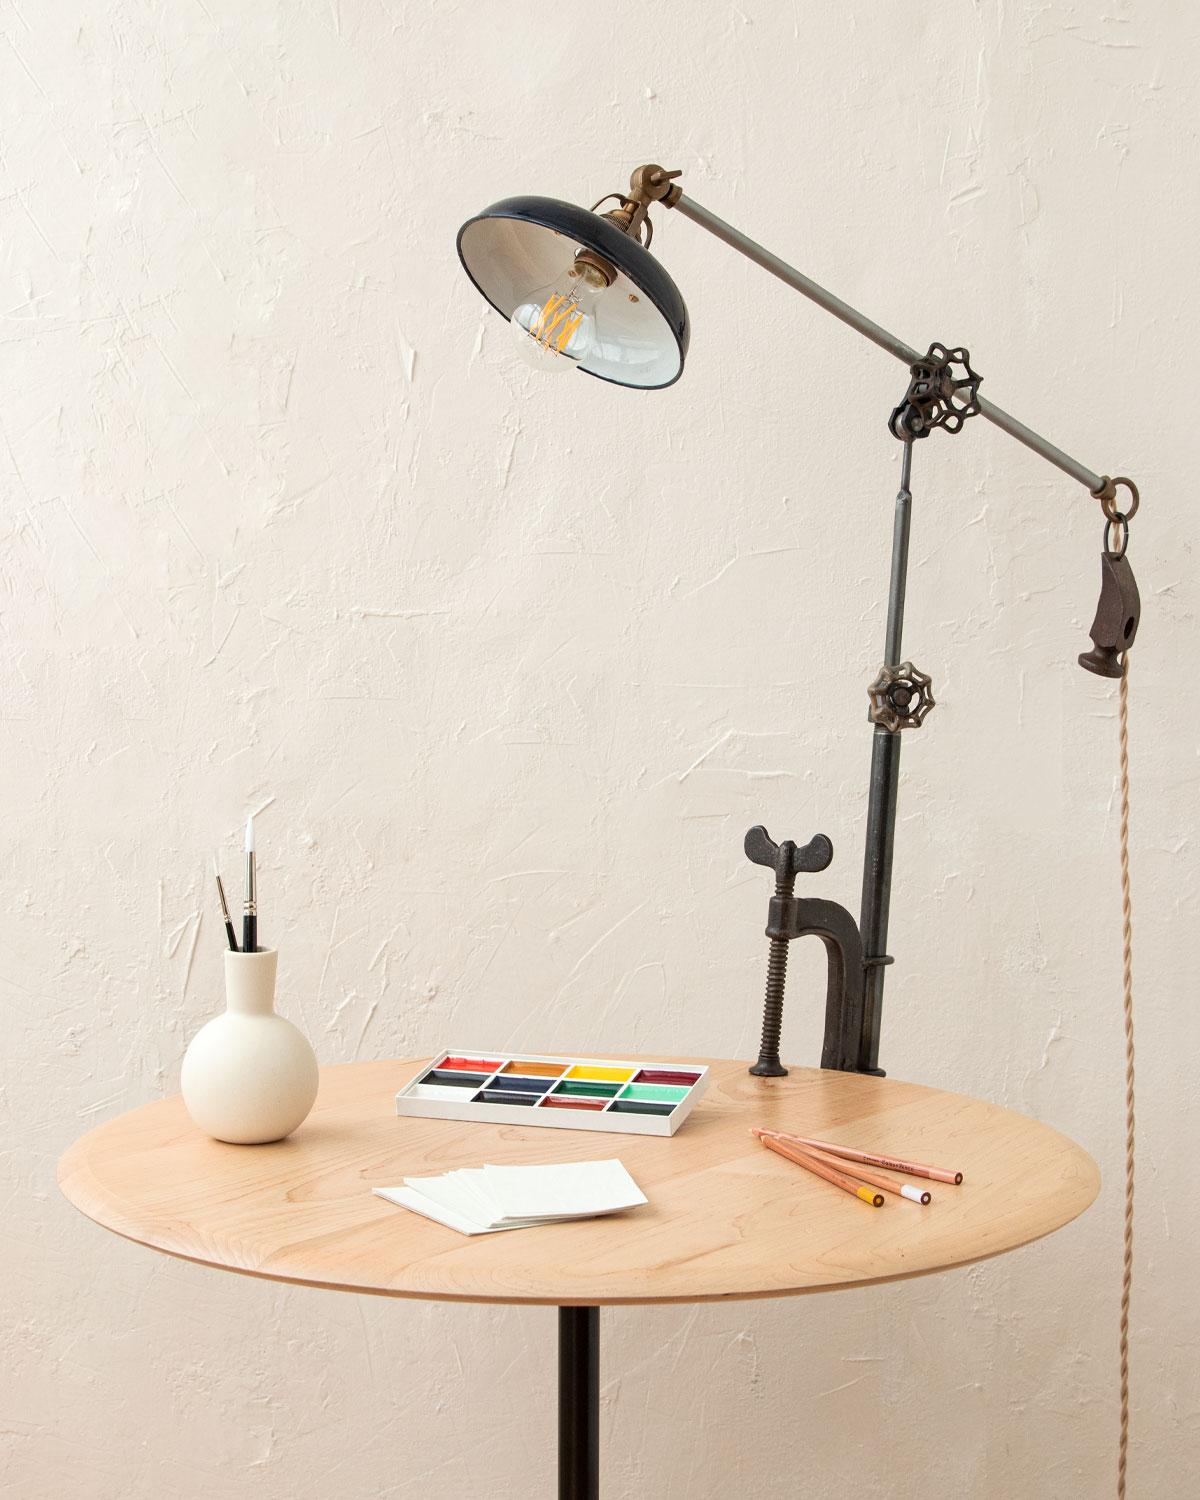 Robert True Ogden's one-of-a-like found object lamps are made by hand in Philadelphia. Crafted from pieces and parts sourced locally and abroad, no two lamps are alike. 

This clamp lamp has a vintage metal shade and a hammer-head counter-balance